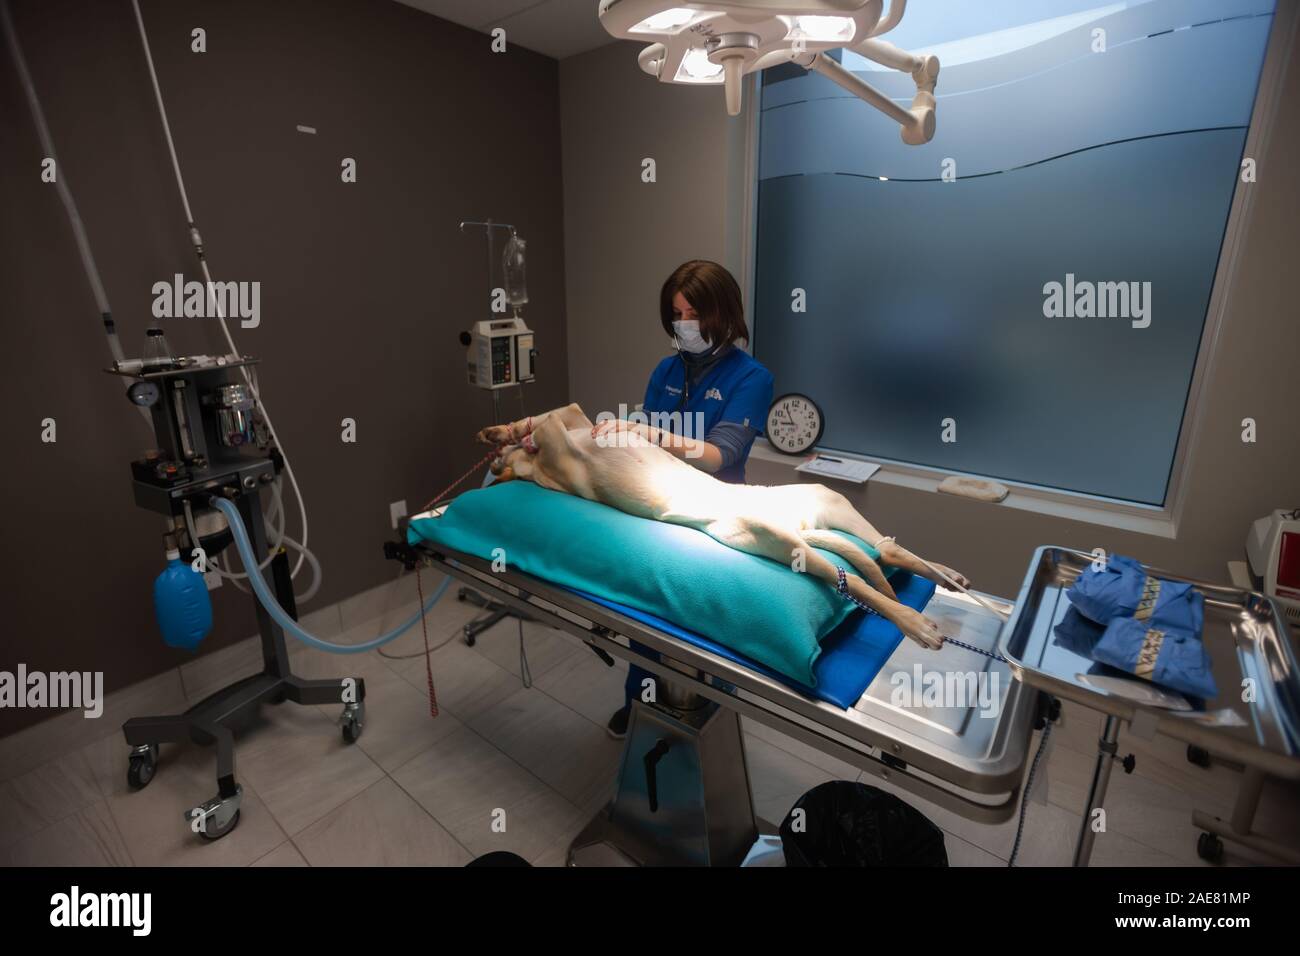 Veterinary technicians prepare a canine for surgery inside an operating room at a veterinary clinic. Stock Photo